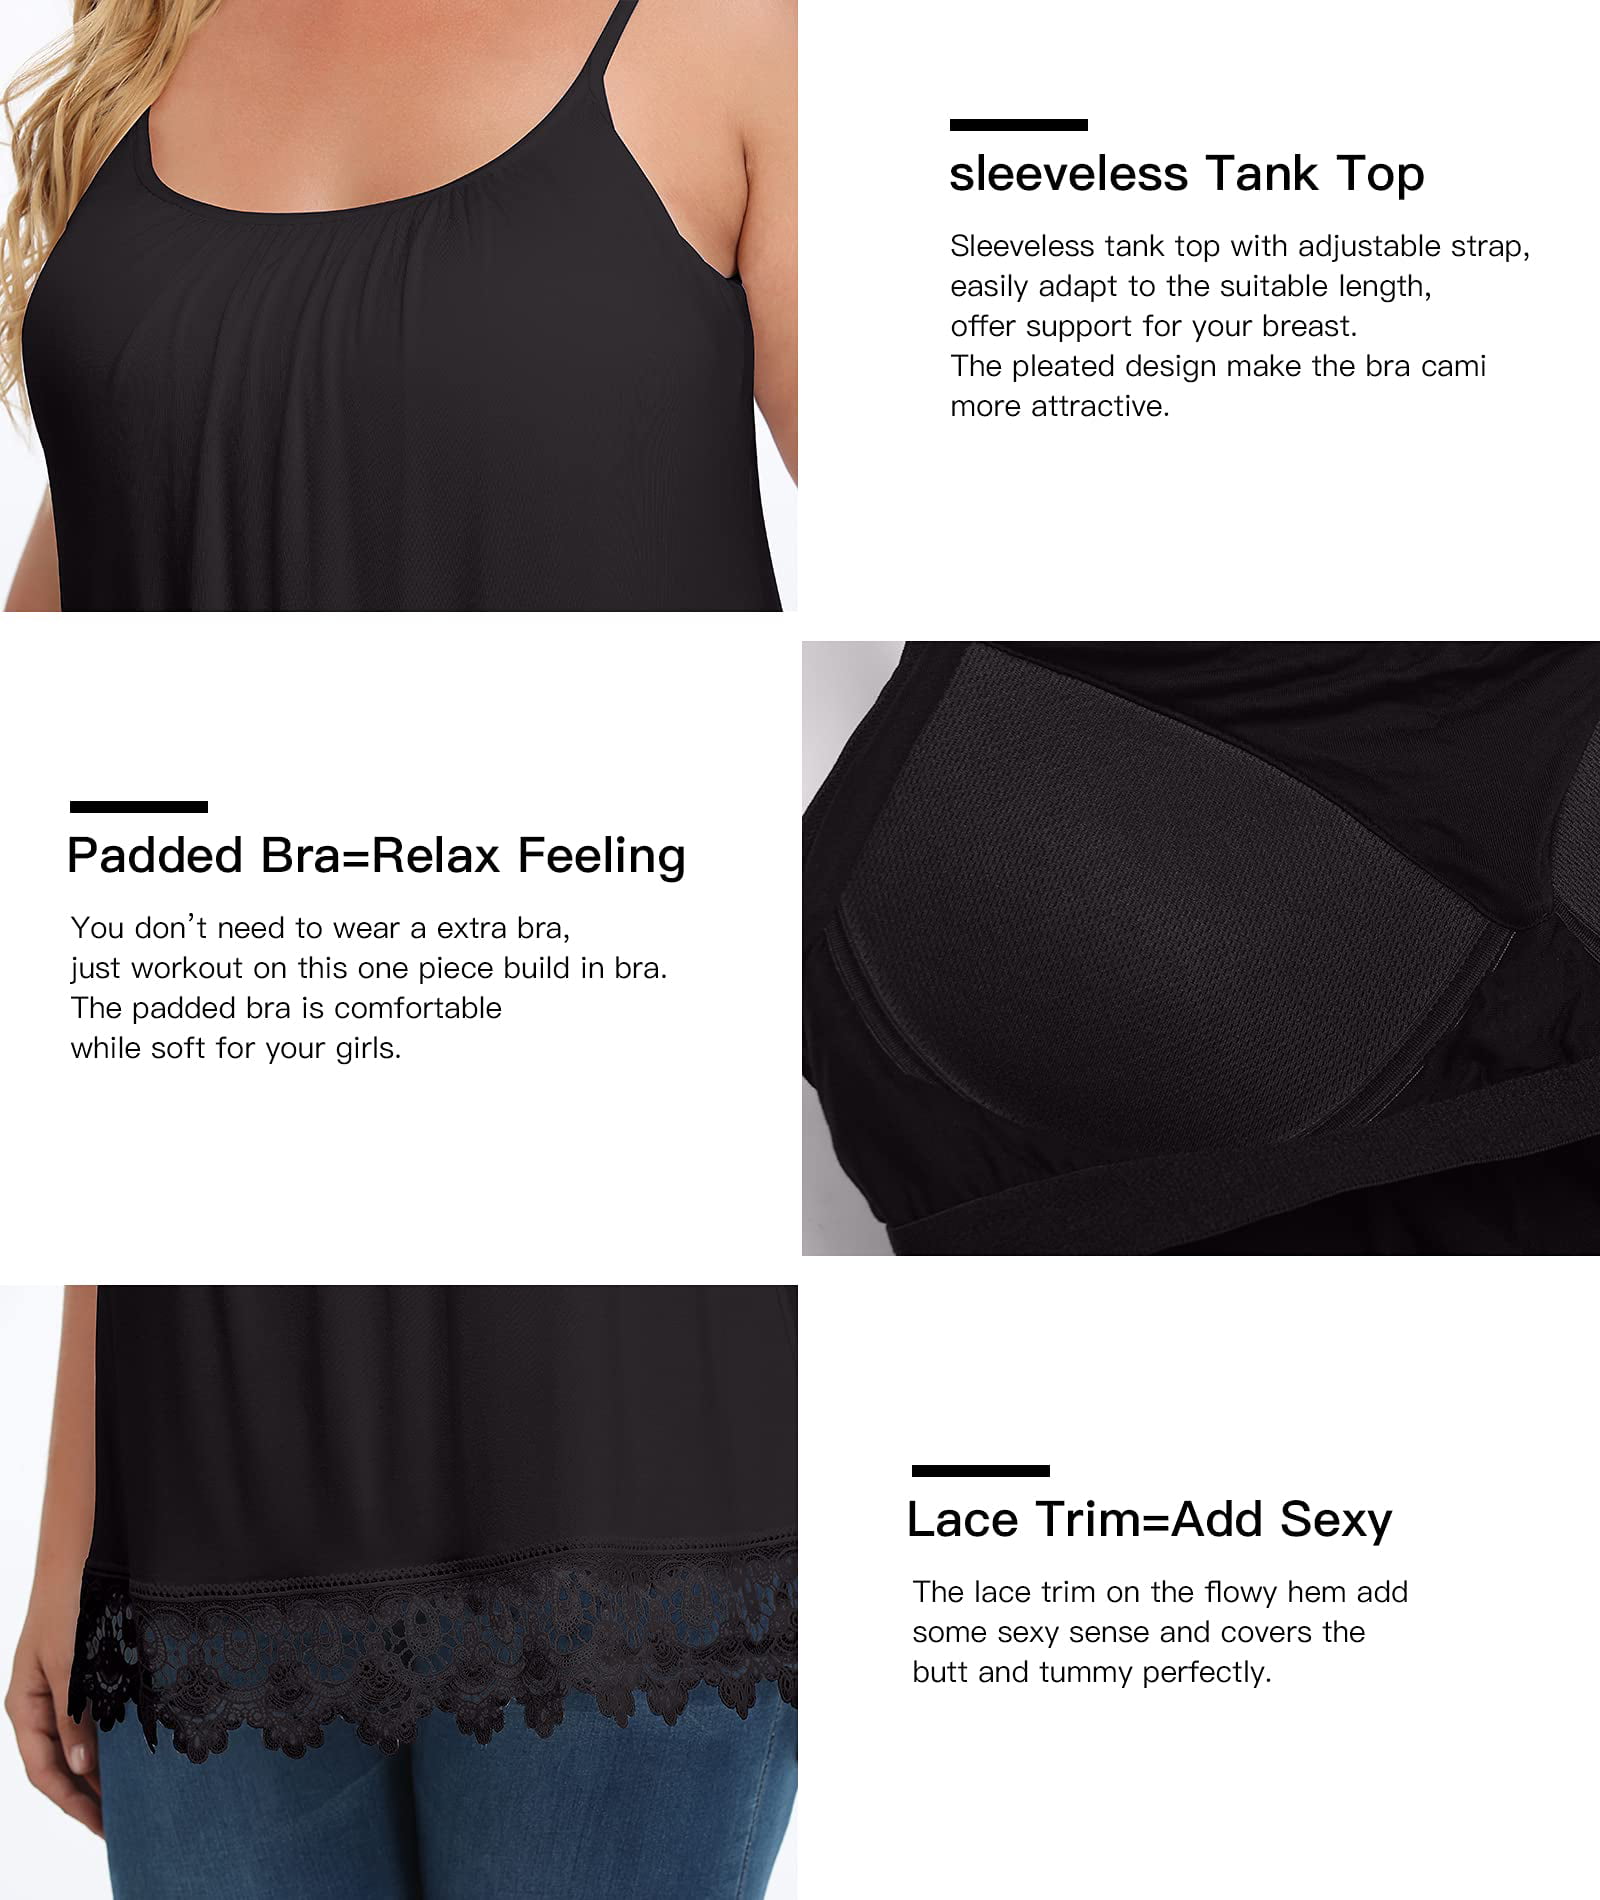 Anyfit Wear 2 Packs Camisoles for Women with Built in Bra Adjustable Strap  Tank Tops Sleeveless Cami with Pleats Casual Flowy Lace Cami Shirts  Black-White-Lace Hem,S 